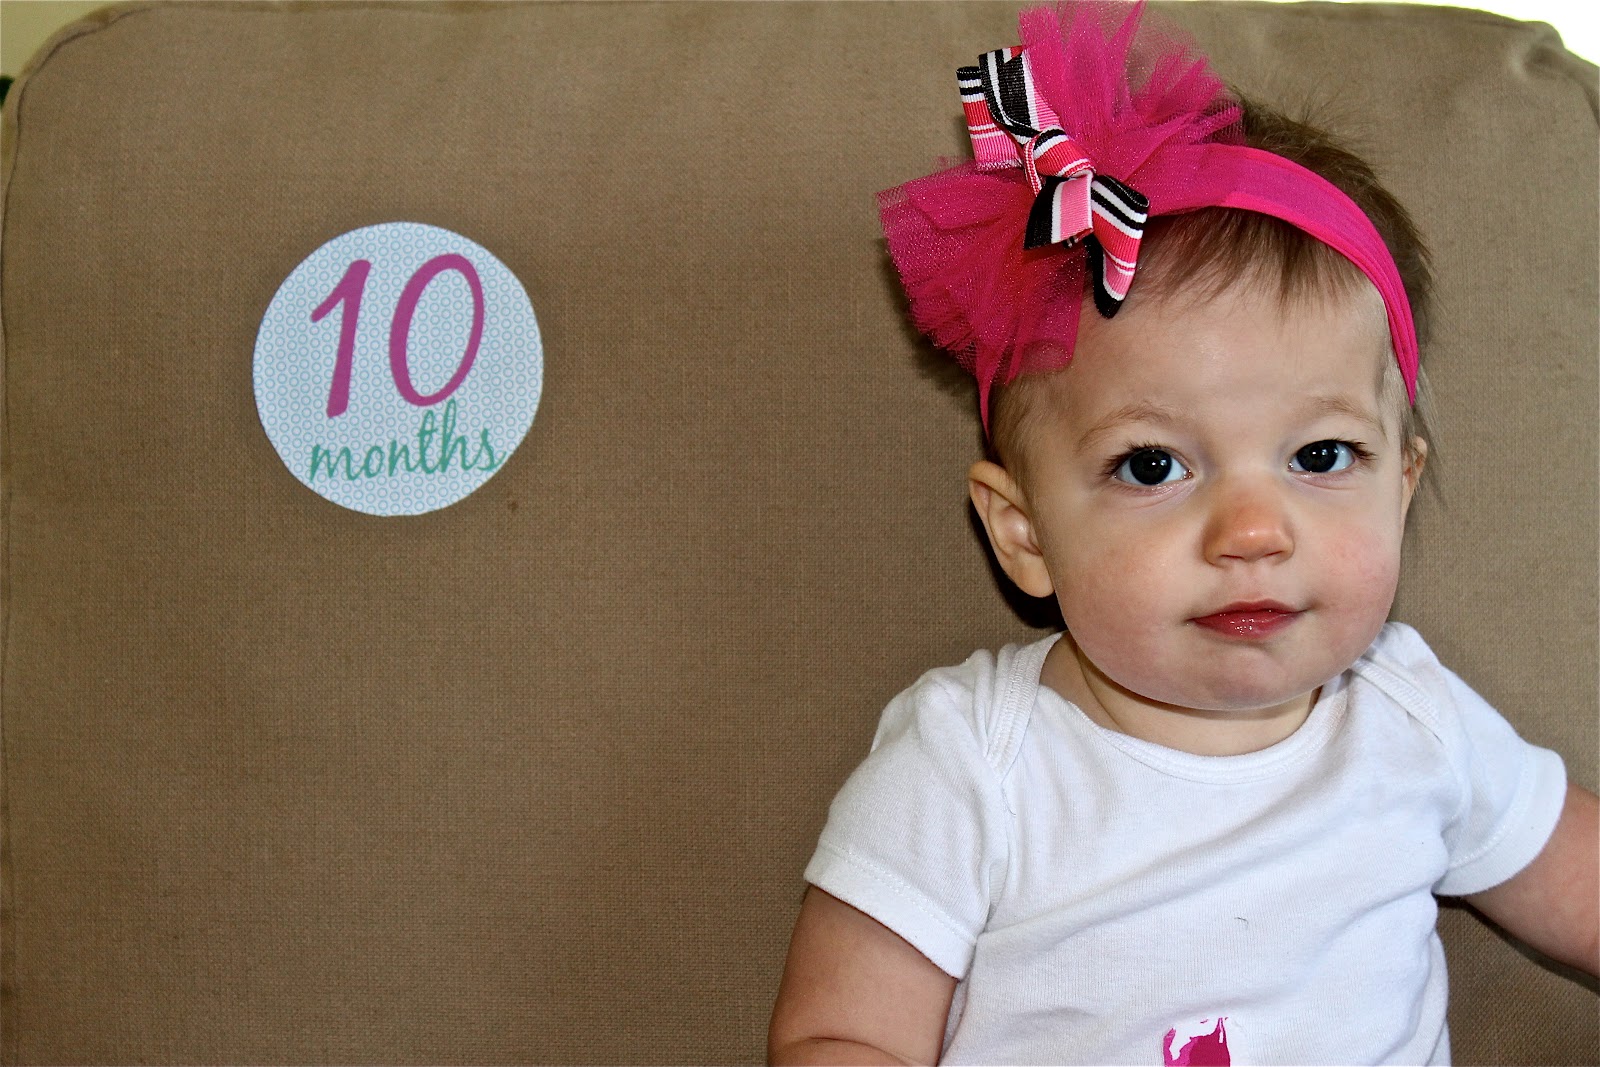 Ten months. 10 Babies. 10 Months. 10 Month girl Baby. 10 Months old.